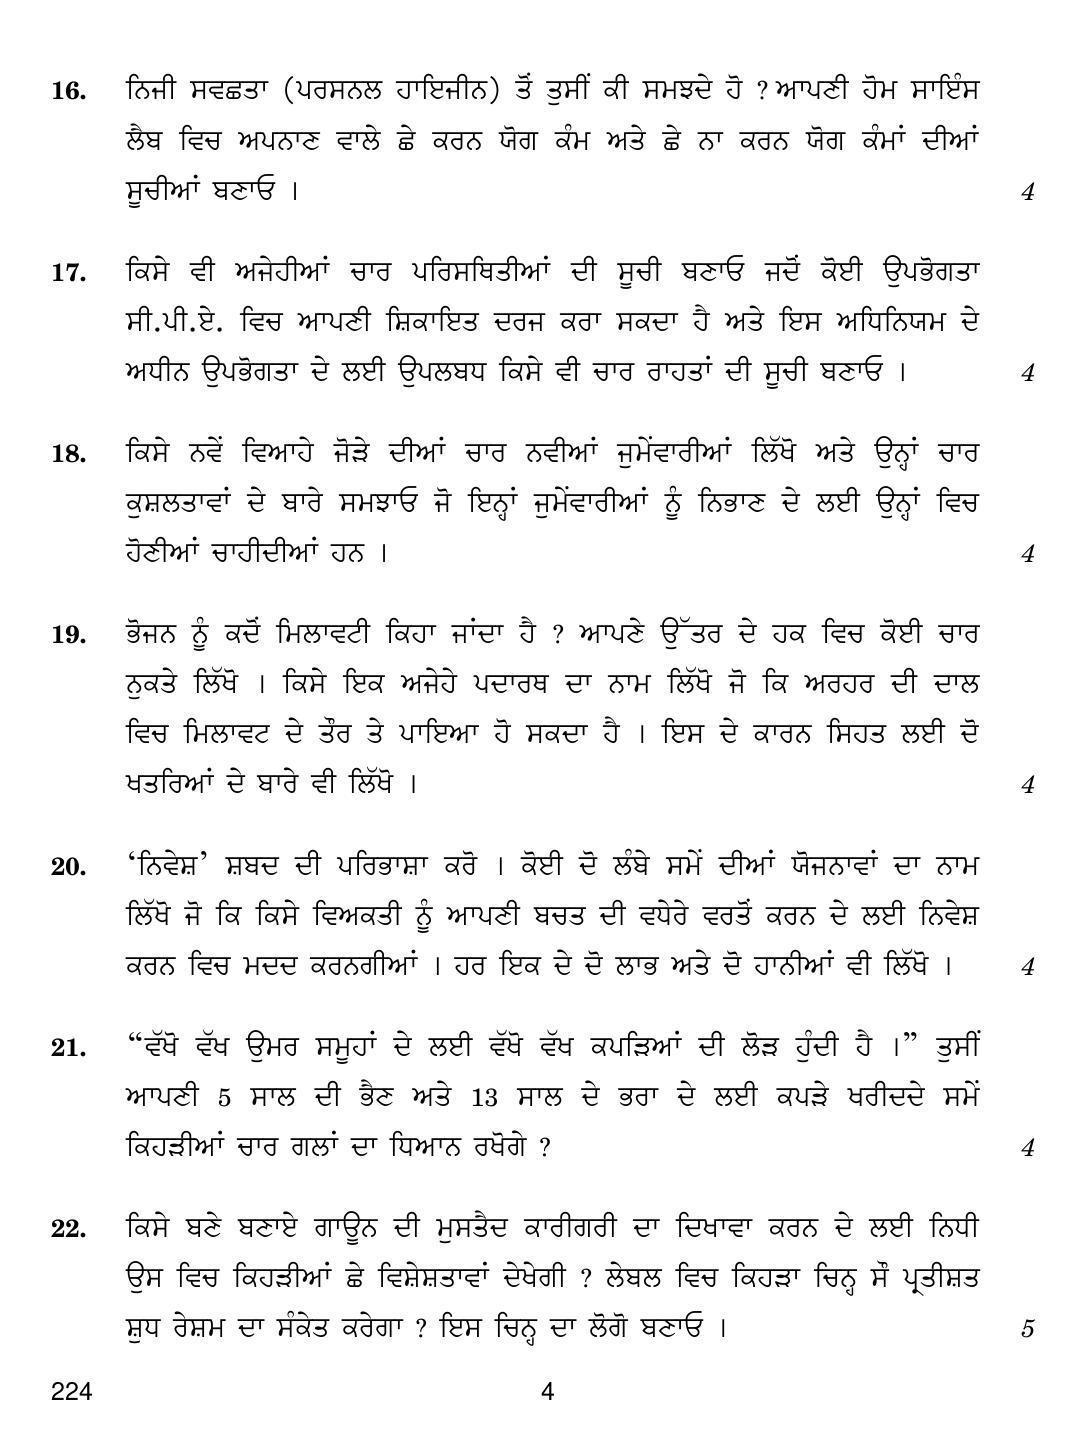 CBSE Class 12 224 HOME SCIENCE PUNJABI VERSION 2018 Question Paper - Page 4